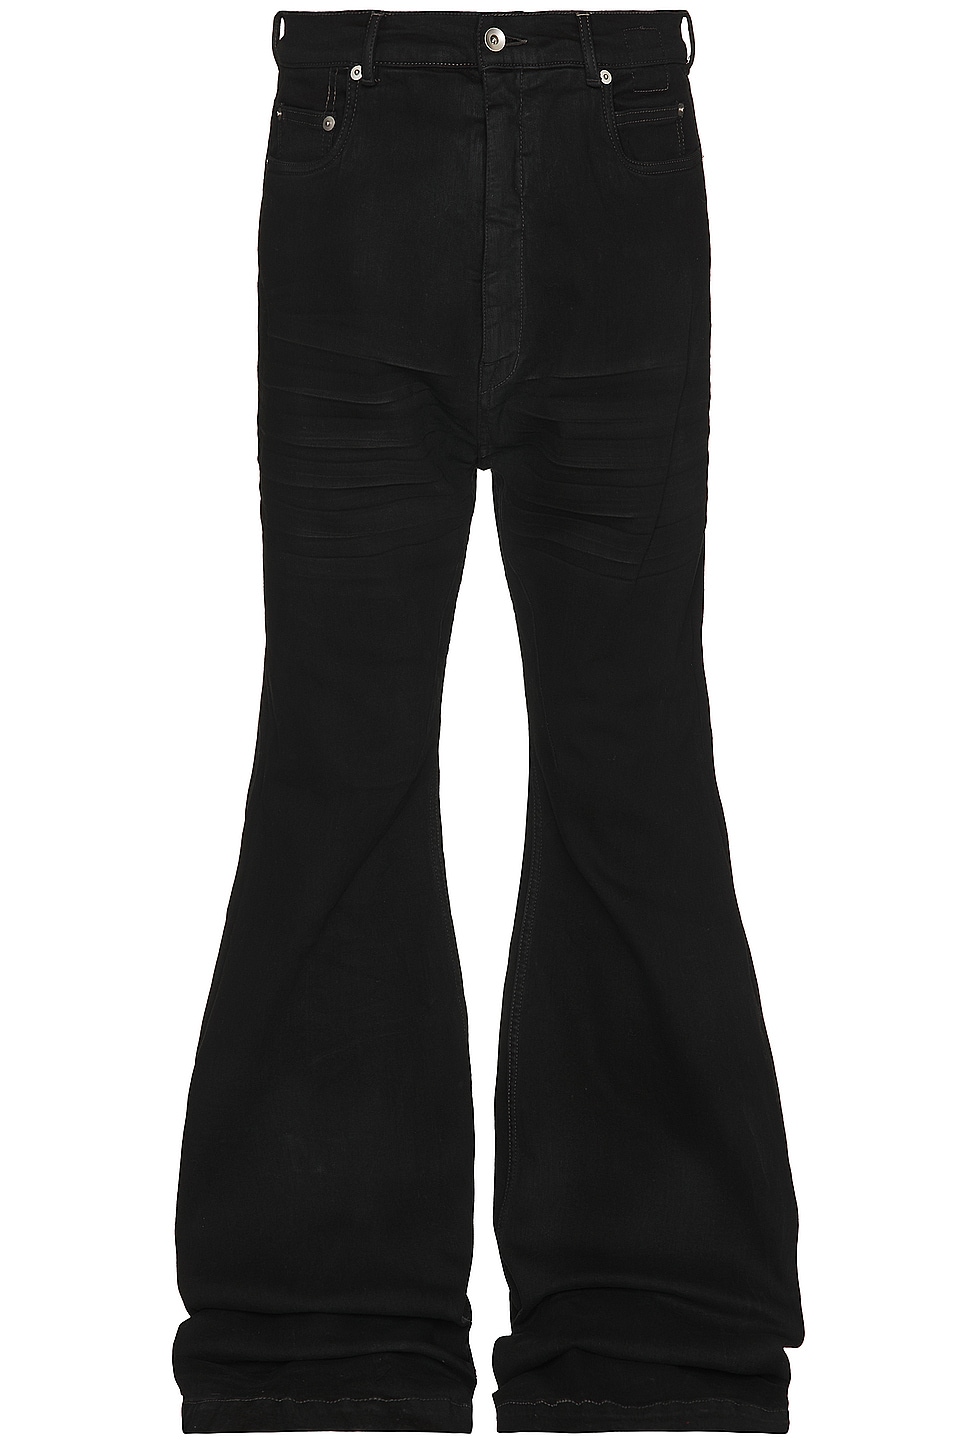 Image 1 of DRKSHDW by Rick Owens Bolan Bootcut in Black